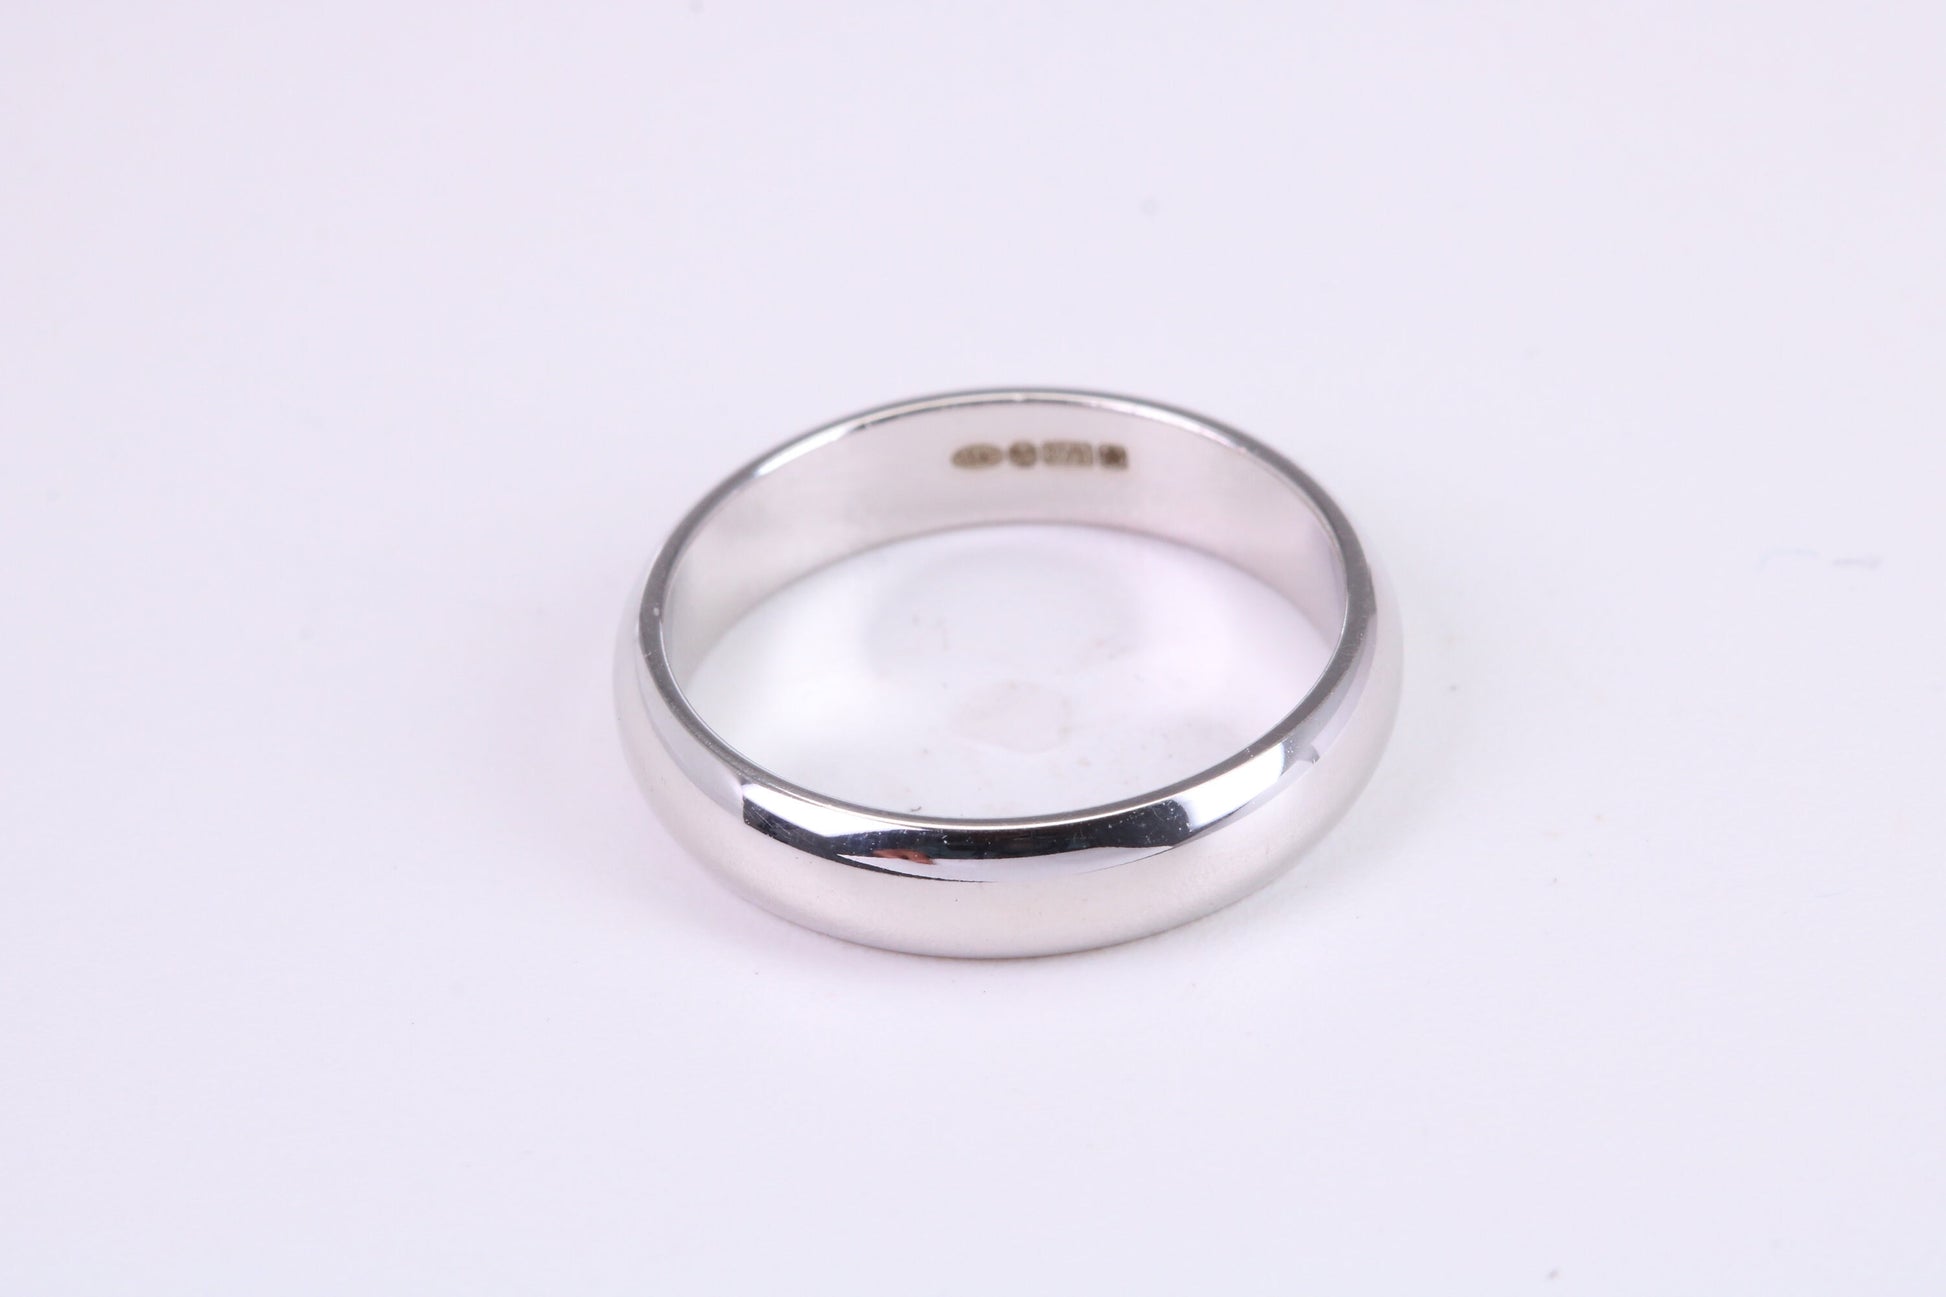 4 mm Wide Simple Traditional D Profile Wedding Band, Made from Solid White Gold, British Hallmarked